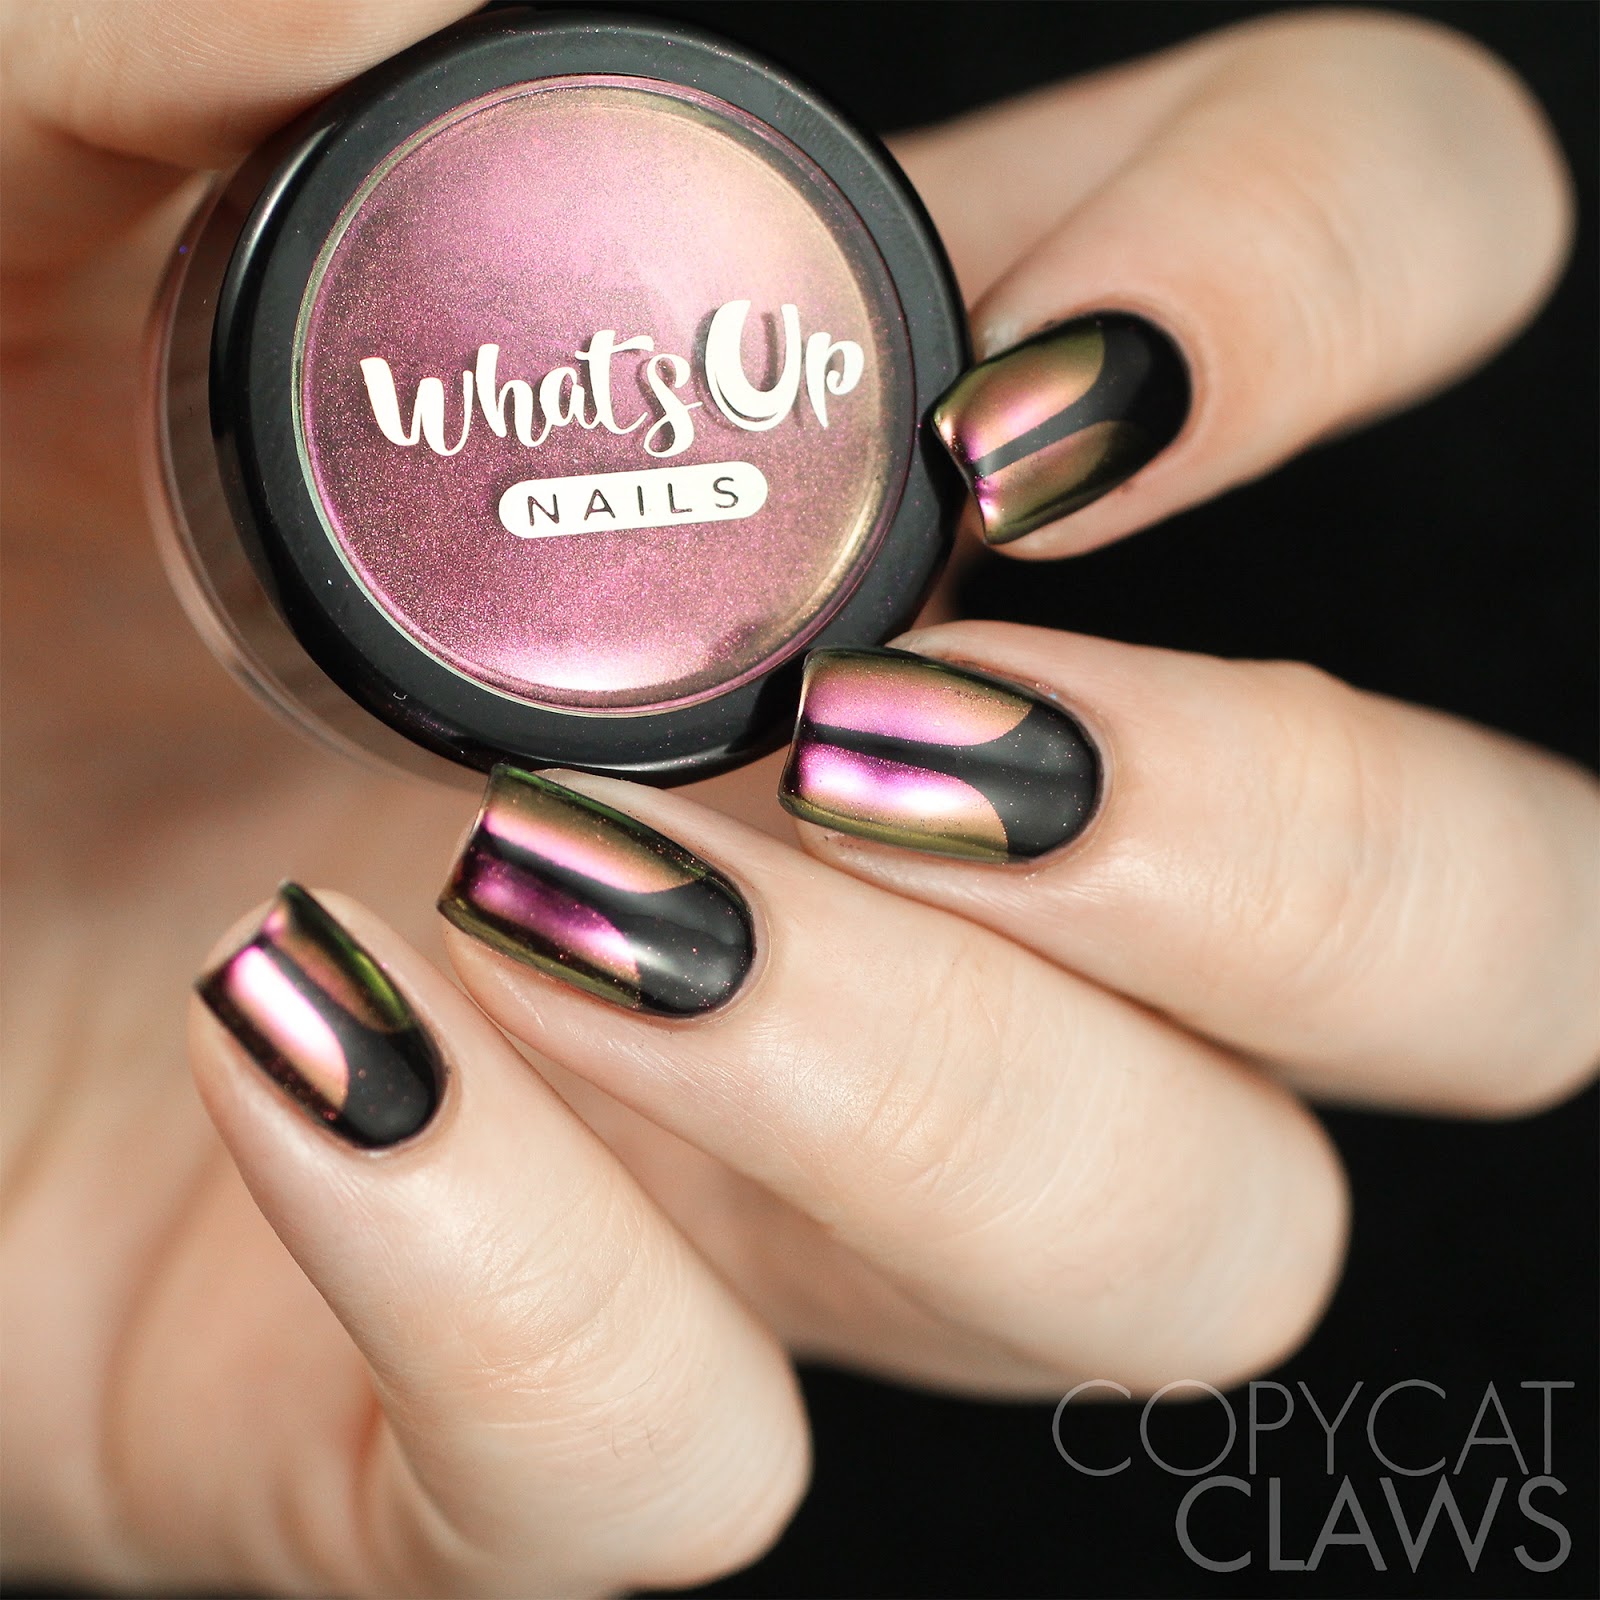 Copycat Claws: Whats Up Nails Fairy Powder and Holographic Flakies